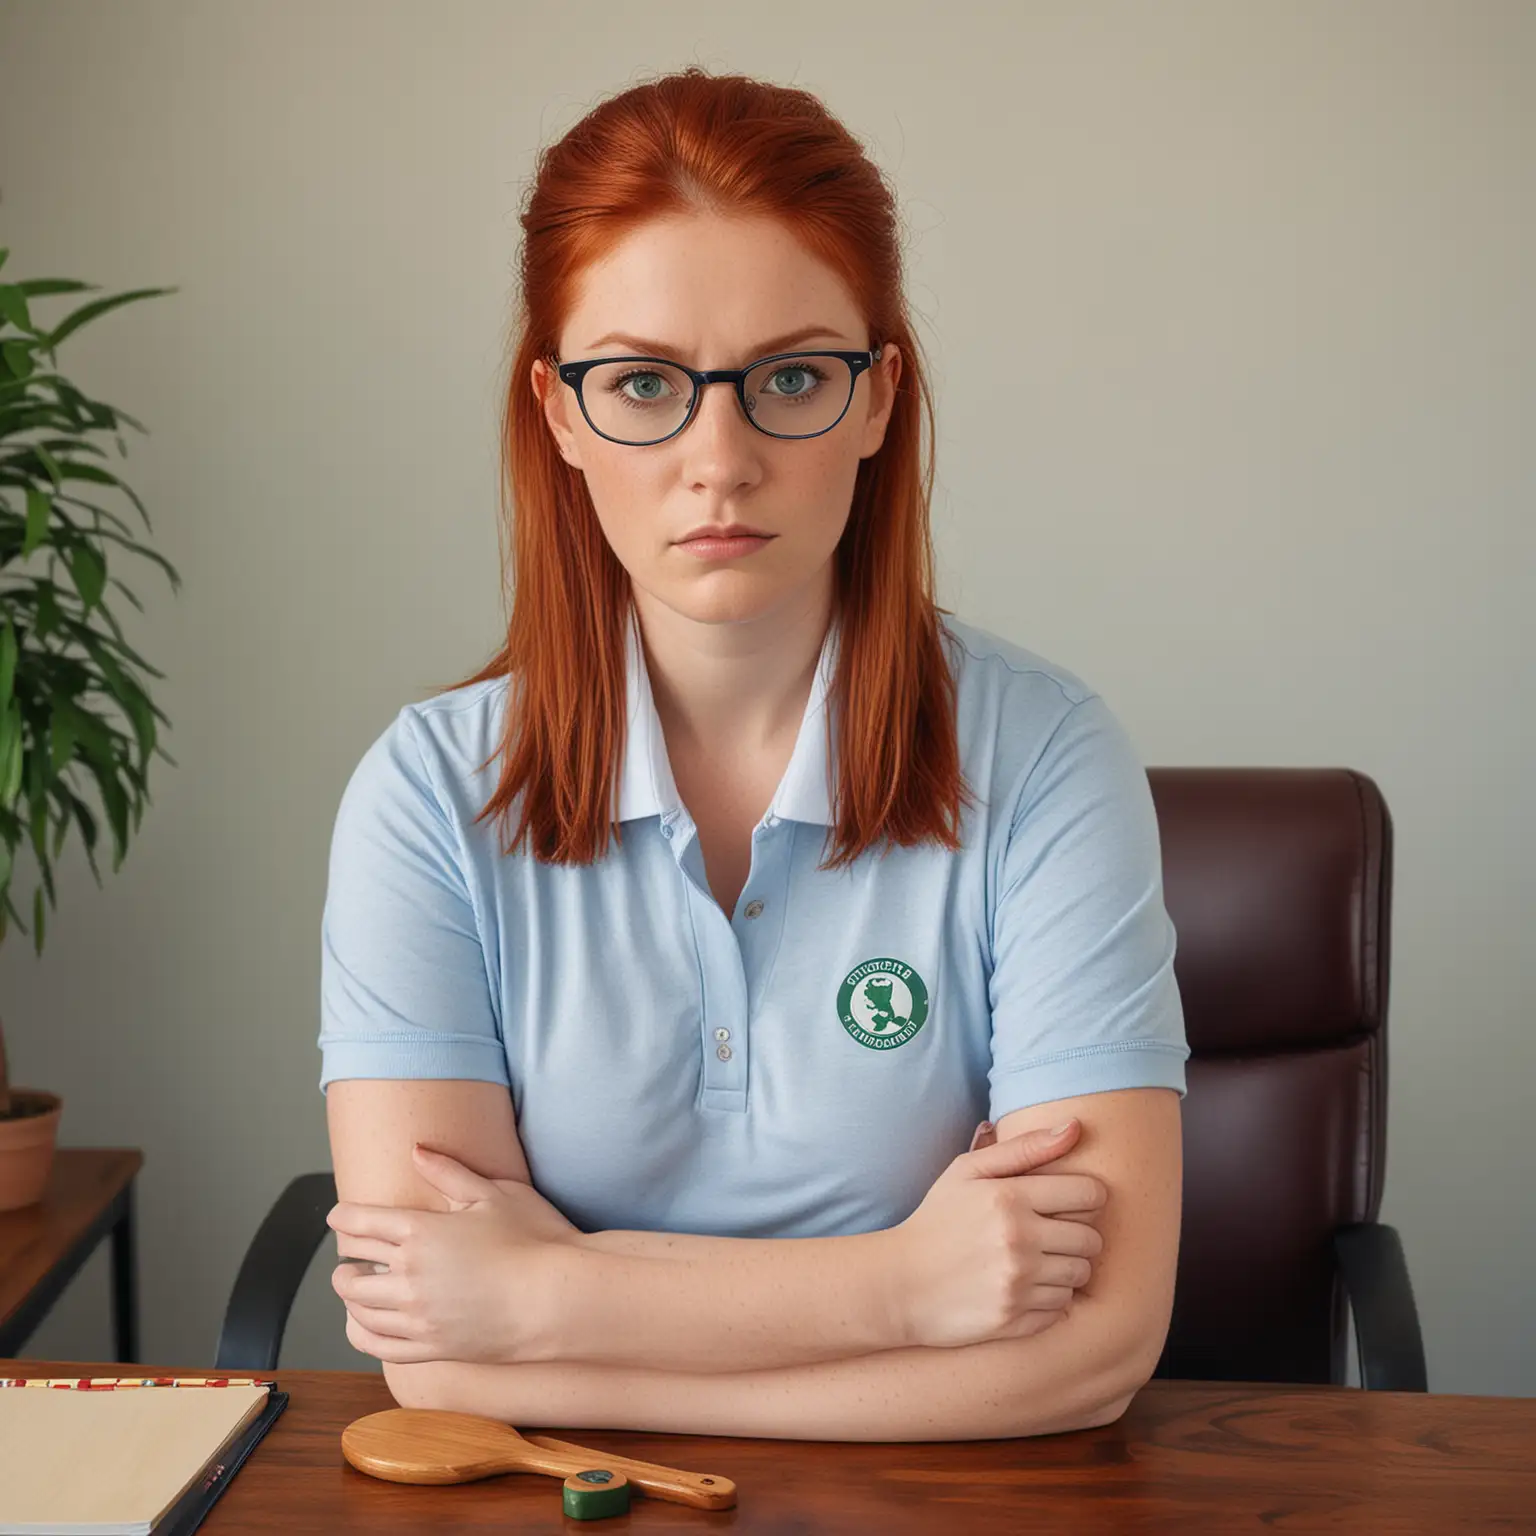 A Business woman is sitting on the desk in her office. She is staring at me with a very stern look on her face. She is about 25 with red hair, green eyes, and glasses. She is holding a very large wooden paddle shaped like a ping pong paddle. She is wearing a blue and white polo shirt.